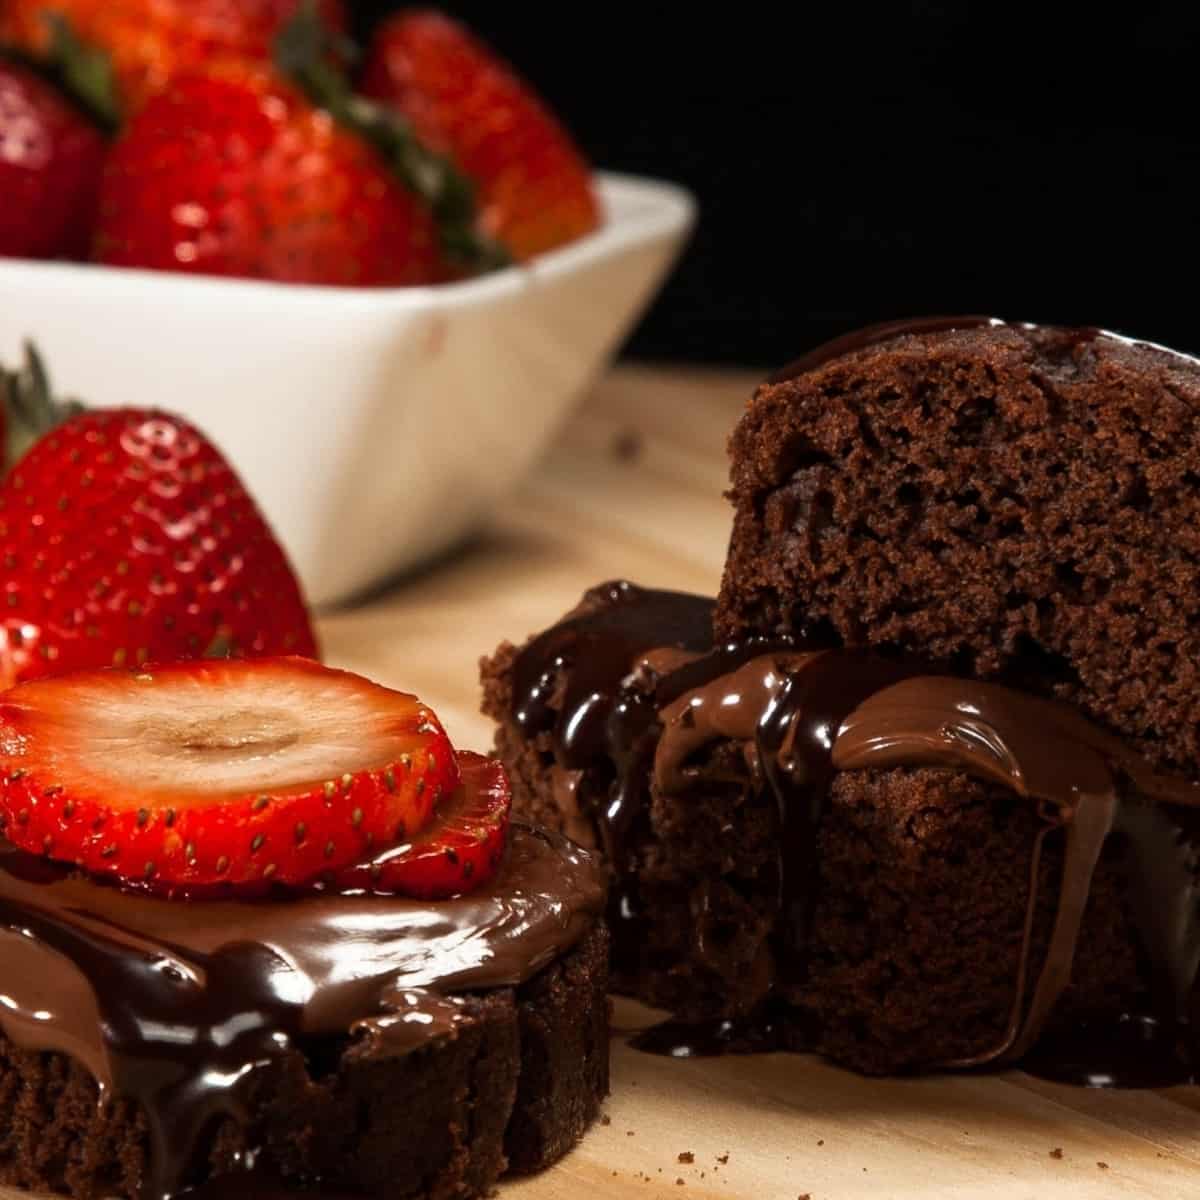 Sliced Chocolate Cake drizzled with chocolate syrup on a wooden cutting board with Strawberries and a white bowl holding strawberries